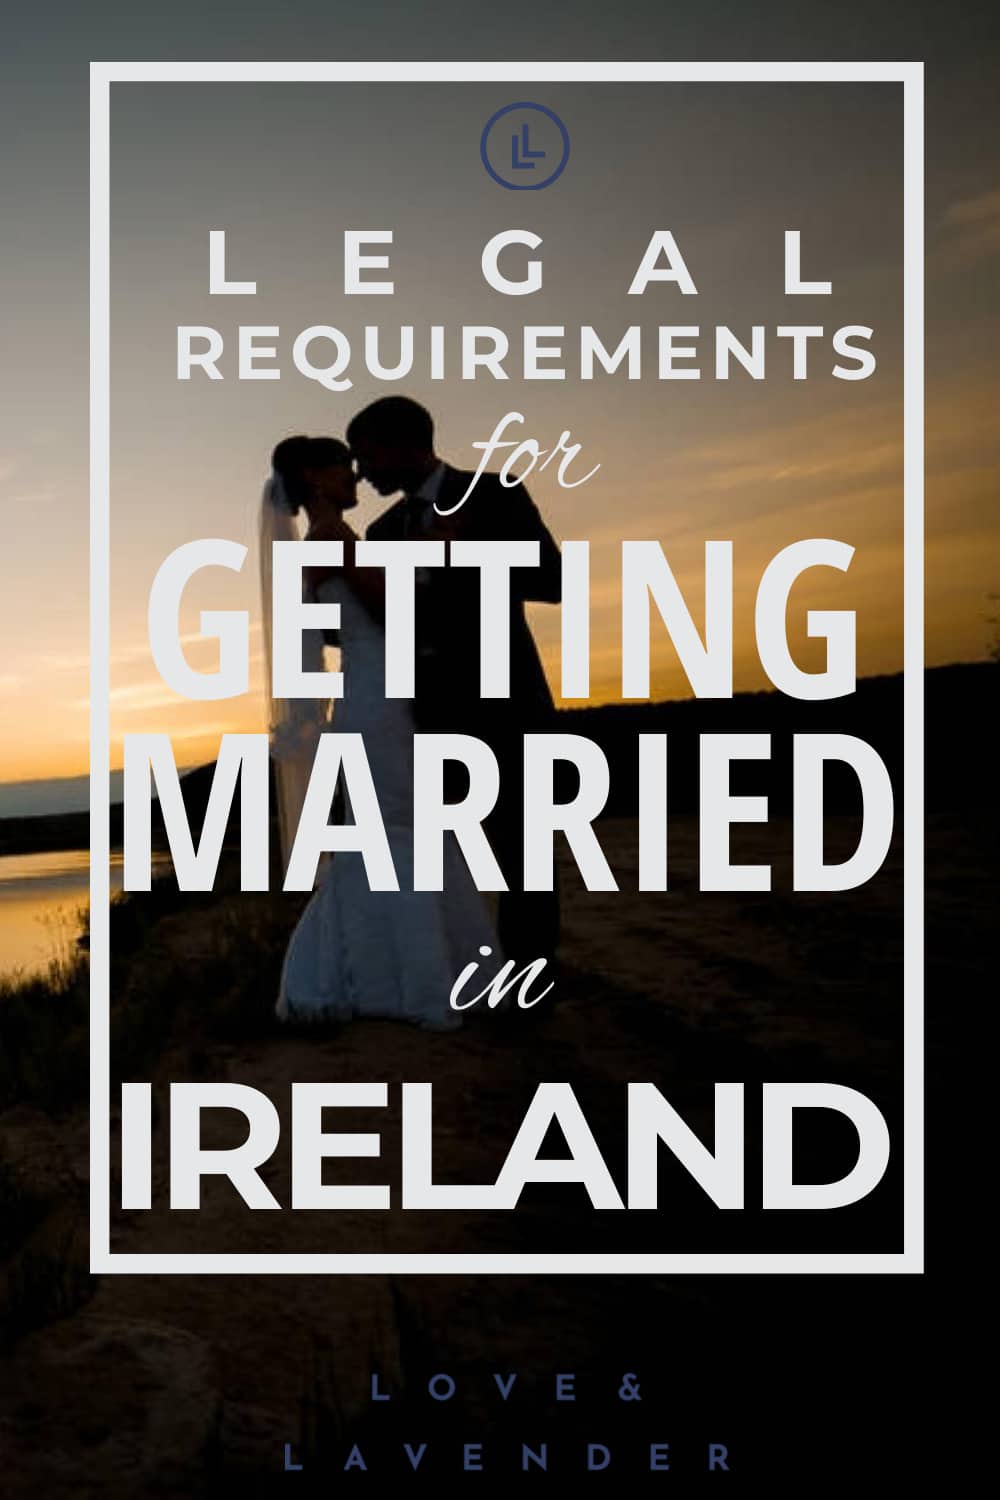 Pinterest pin - Legal Requirements for Getting Married in Ireland